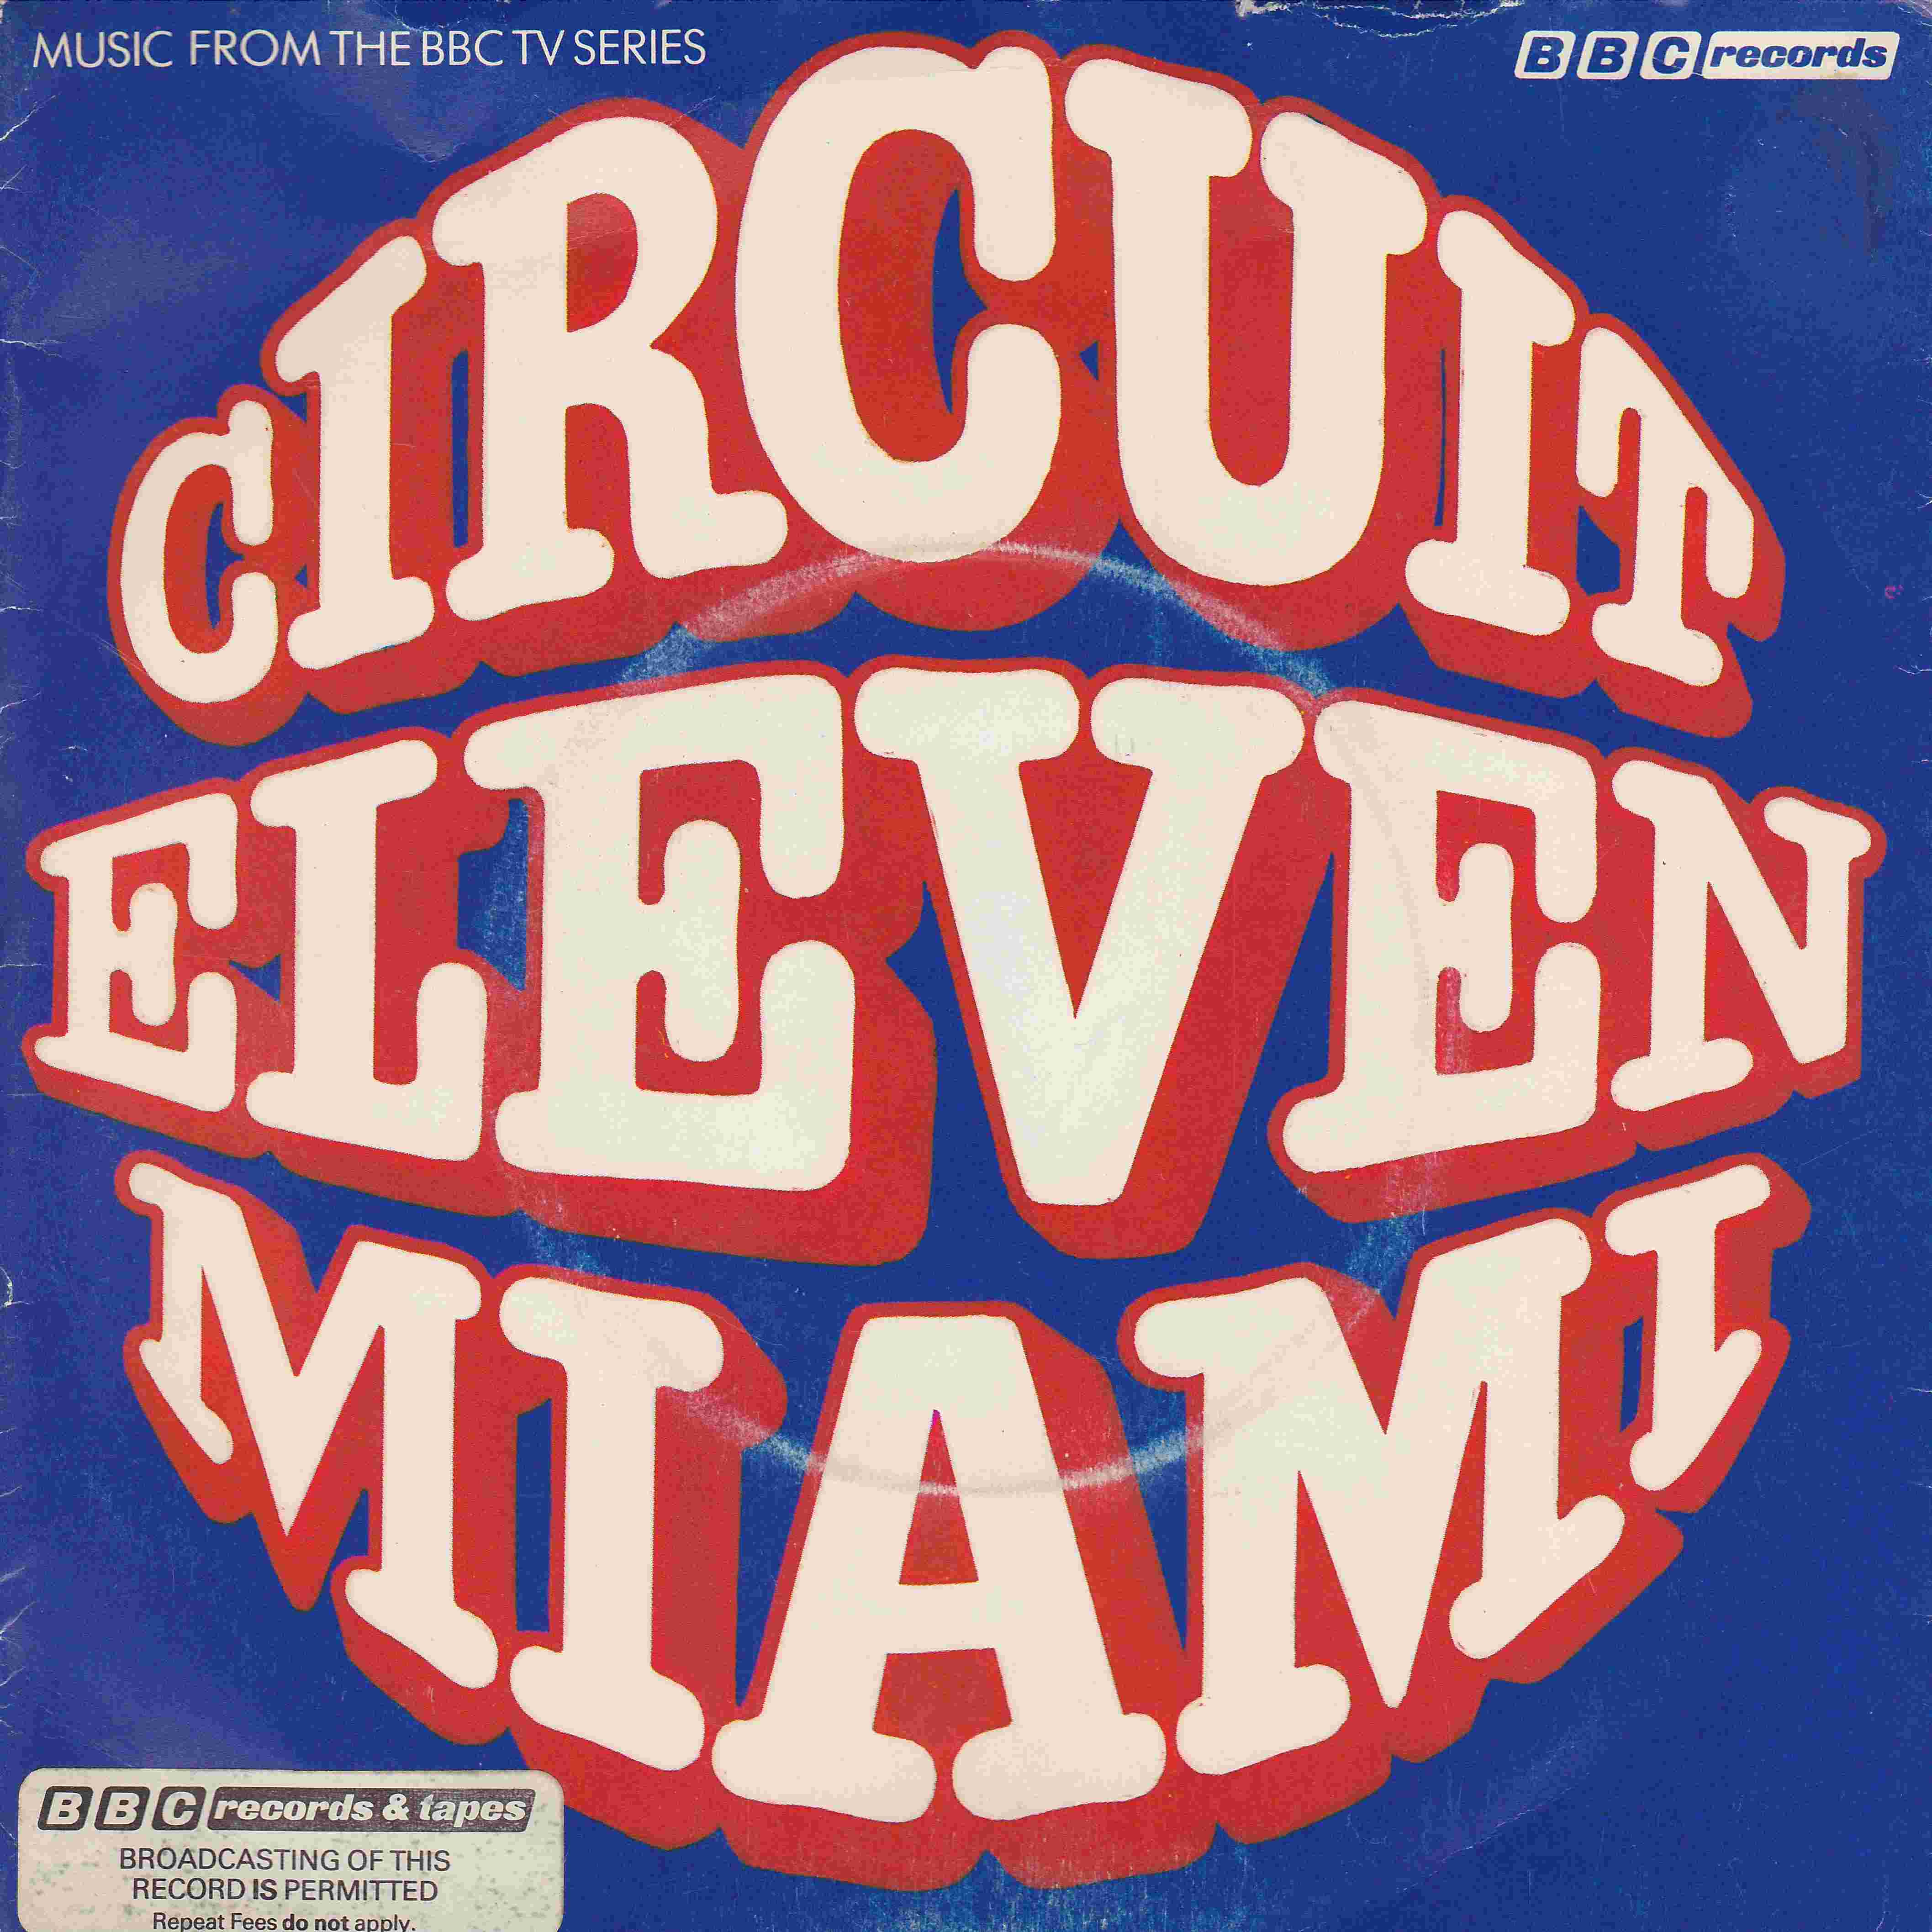 Picture of Circuit eleven - Miami by artist Richard Denton / Martin Cook from the BBC singles - Records and Tapes library